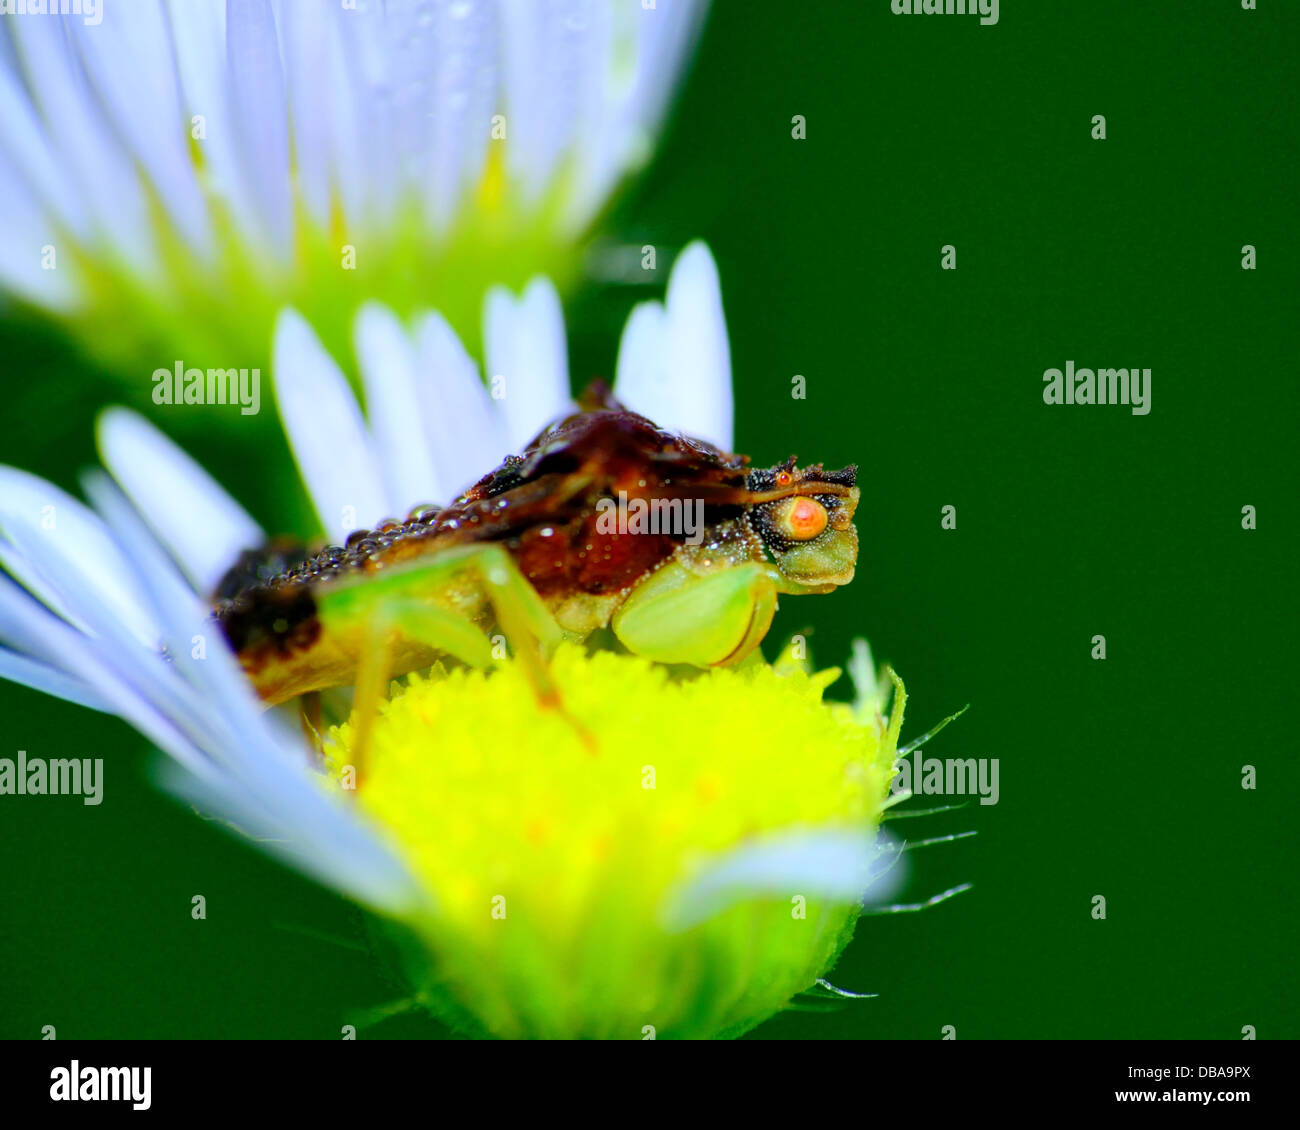 An Ambush Bug perched on a flower top. Stock Photo